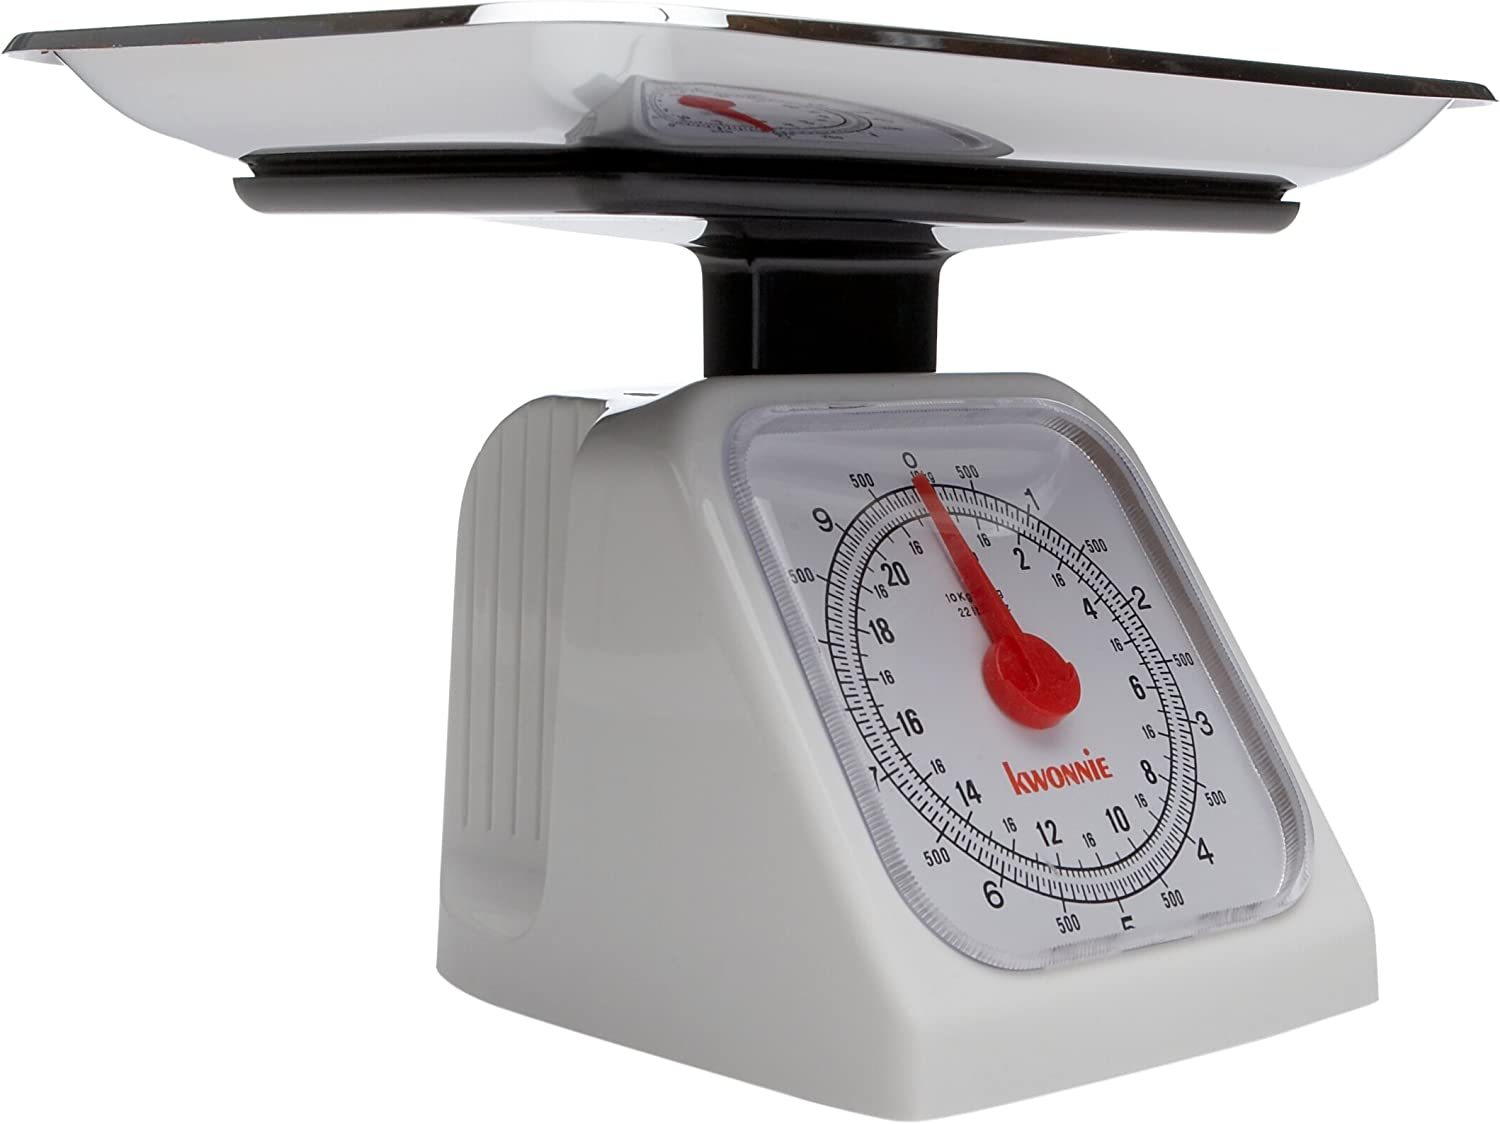 Norpro 22Lb Food Scale Removable Metal Tray, One Size, Shown - $54.99